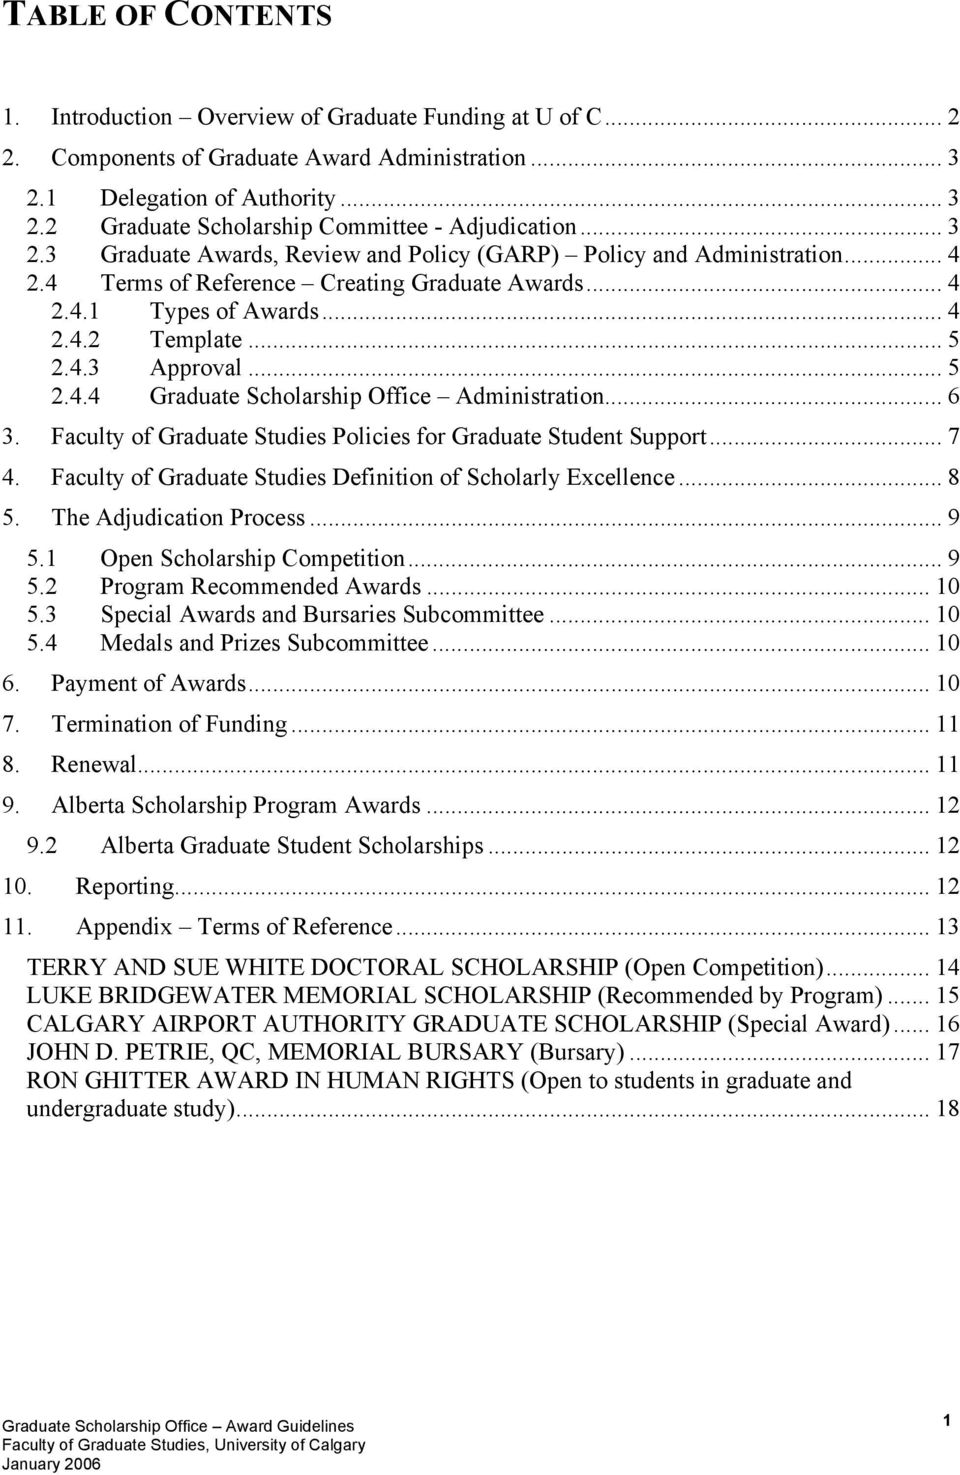 .. 5 2.4.4 Graduate Scholarship Office Administration... 6 3. Faculty of Graduate Studies Policies for Graduate Student Support... 7 4. Faculty of Graduate Studies Definition of Scholarly Excellence.